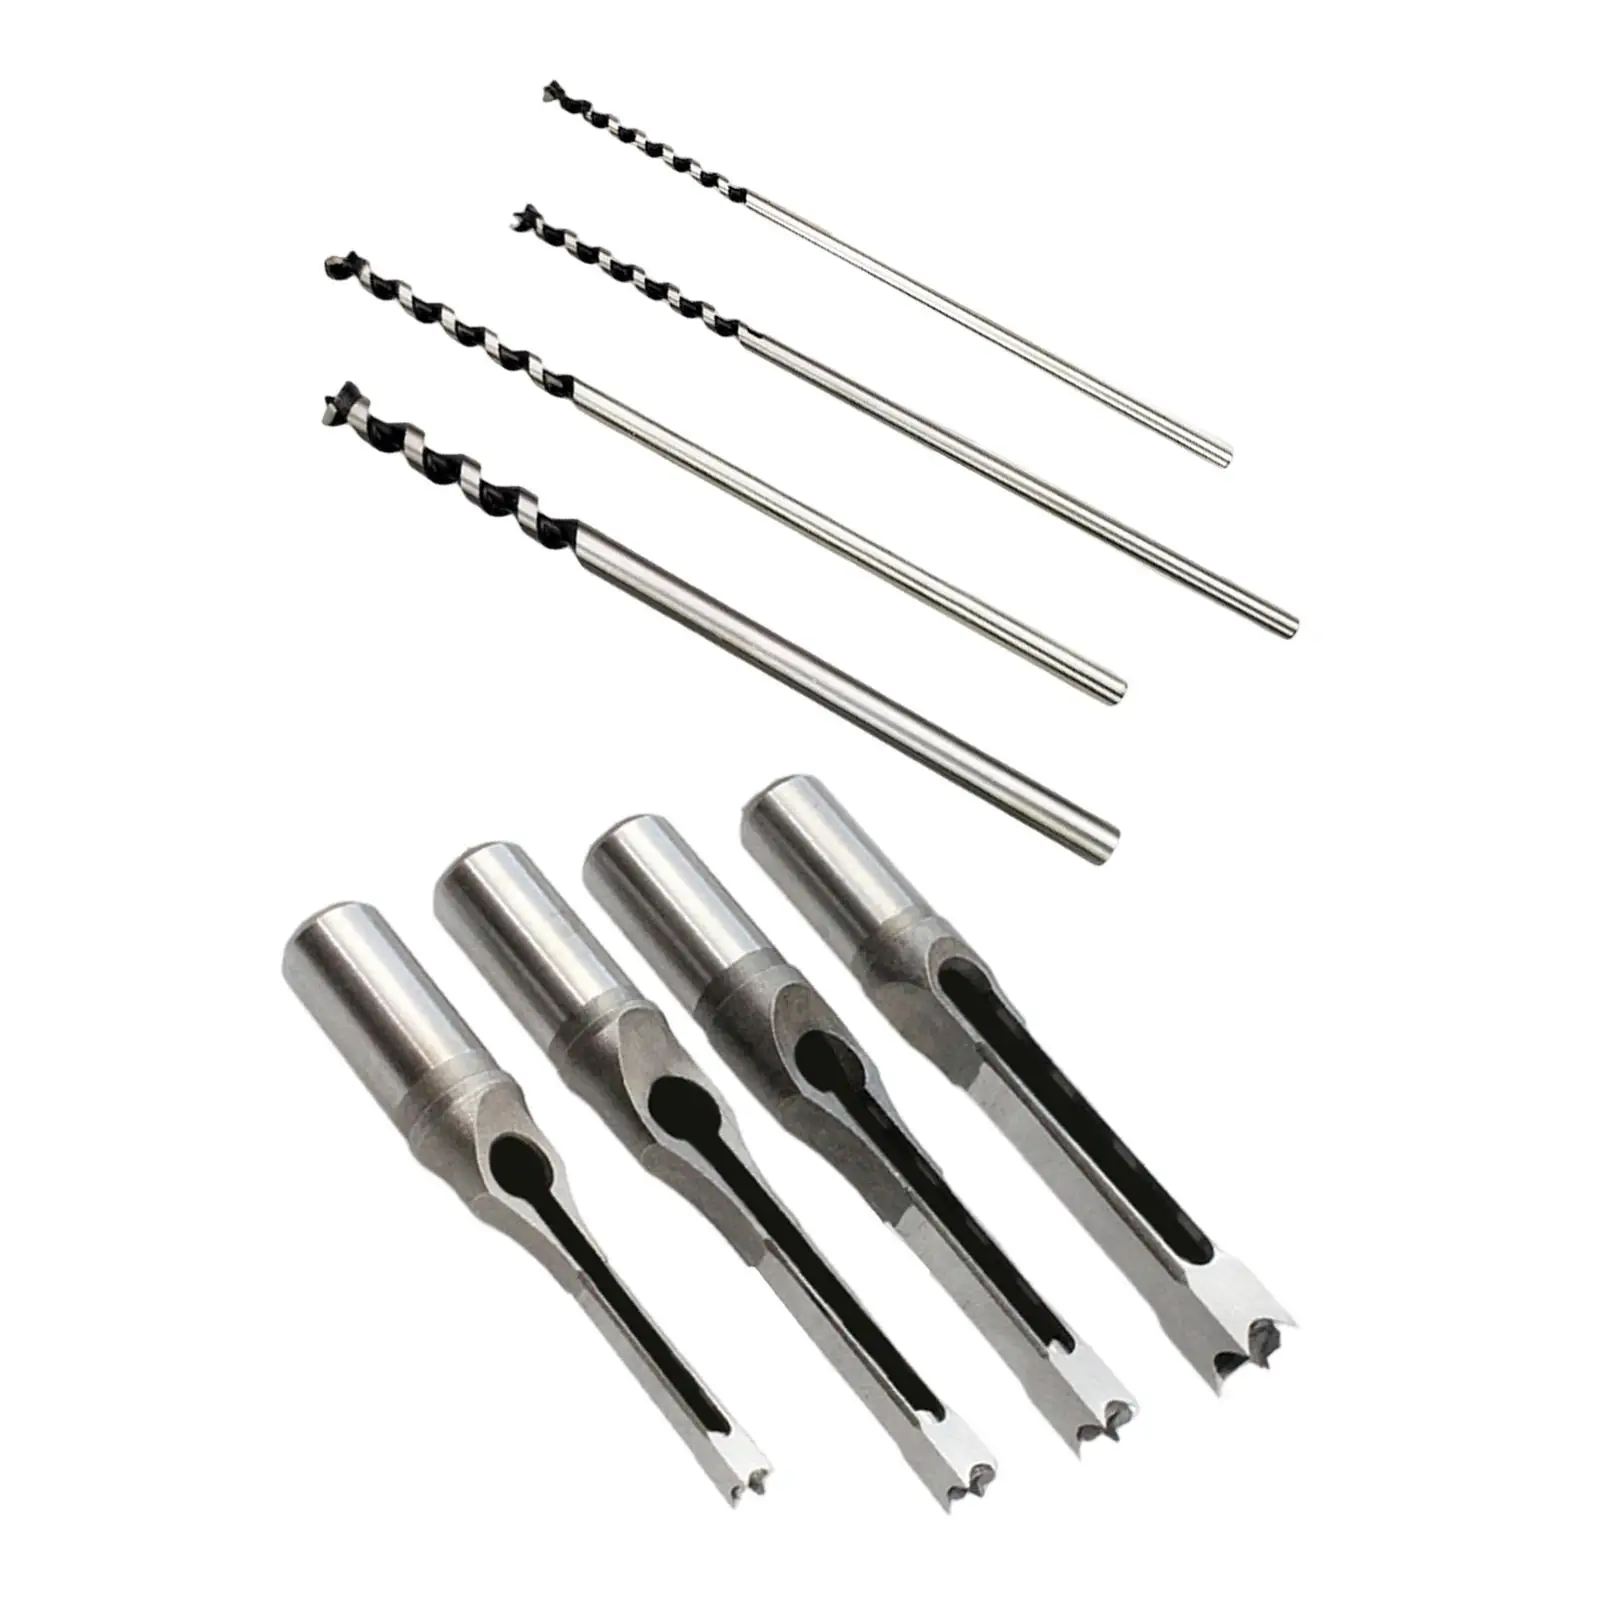 4x HSS Durable Hole Drill Bit for Carpenter Drill Press Attachments Hole Opening Drilling Tools Mortising Machines